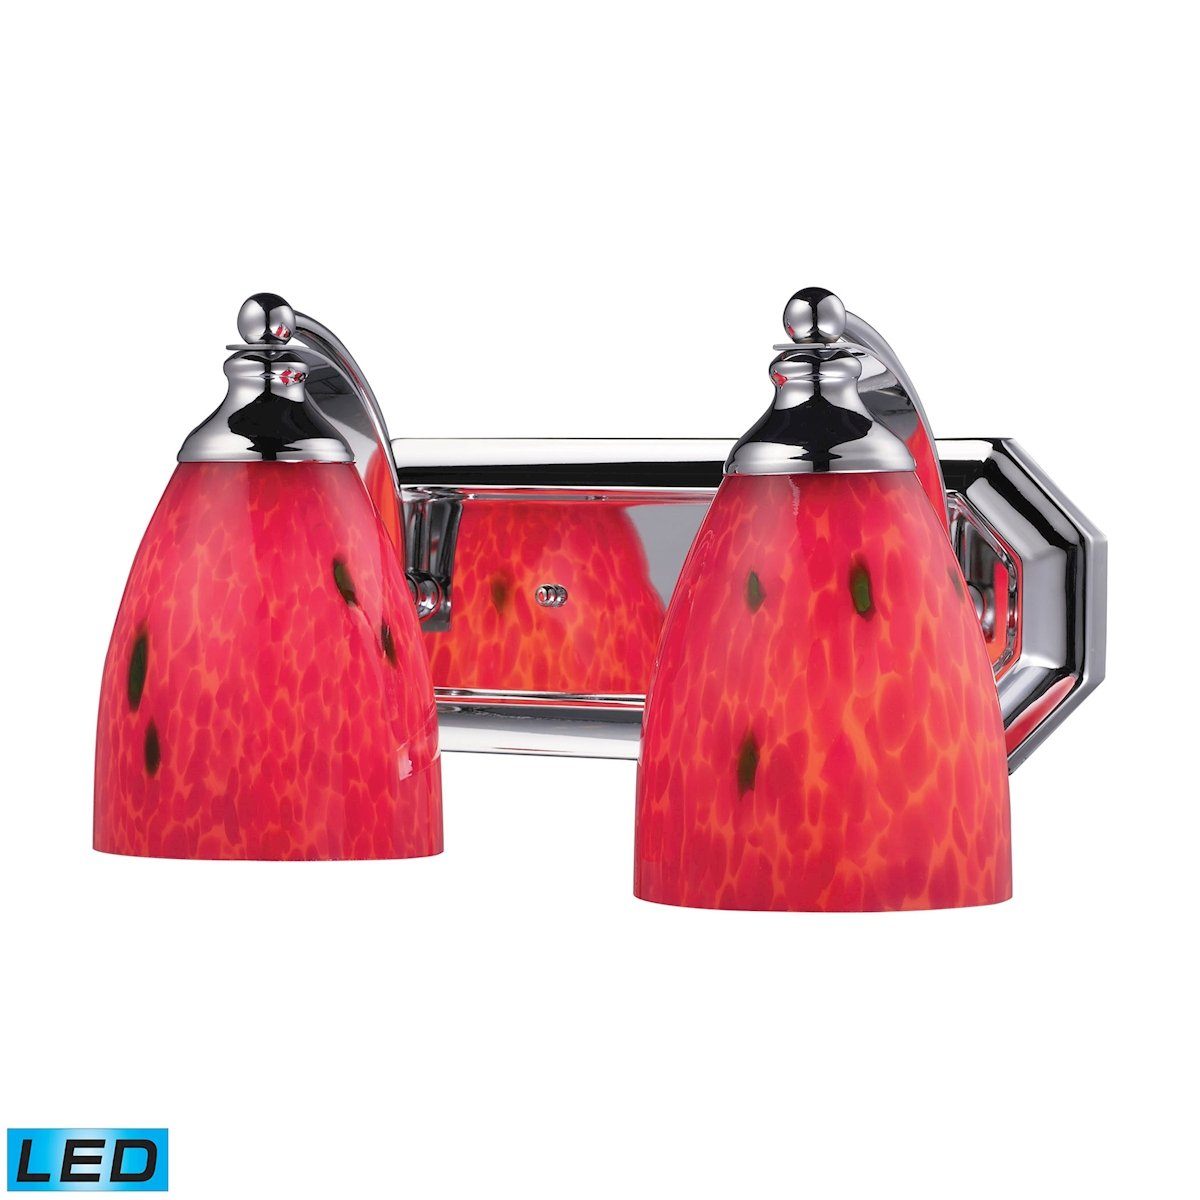 Bath And Spa 2 Light LED Vanity In Polished Chrome And Fire Red Glass Wall Elk Lighting 